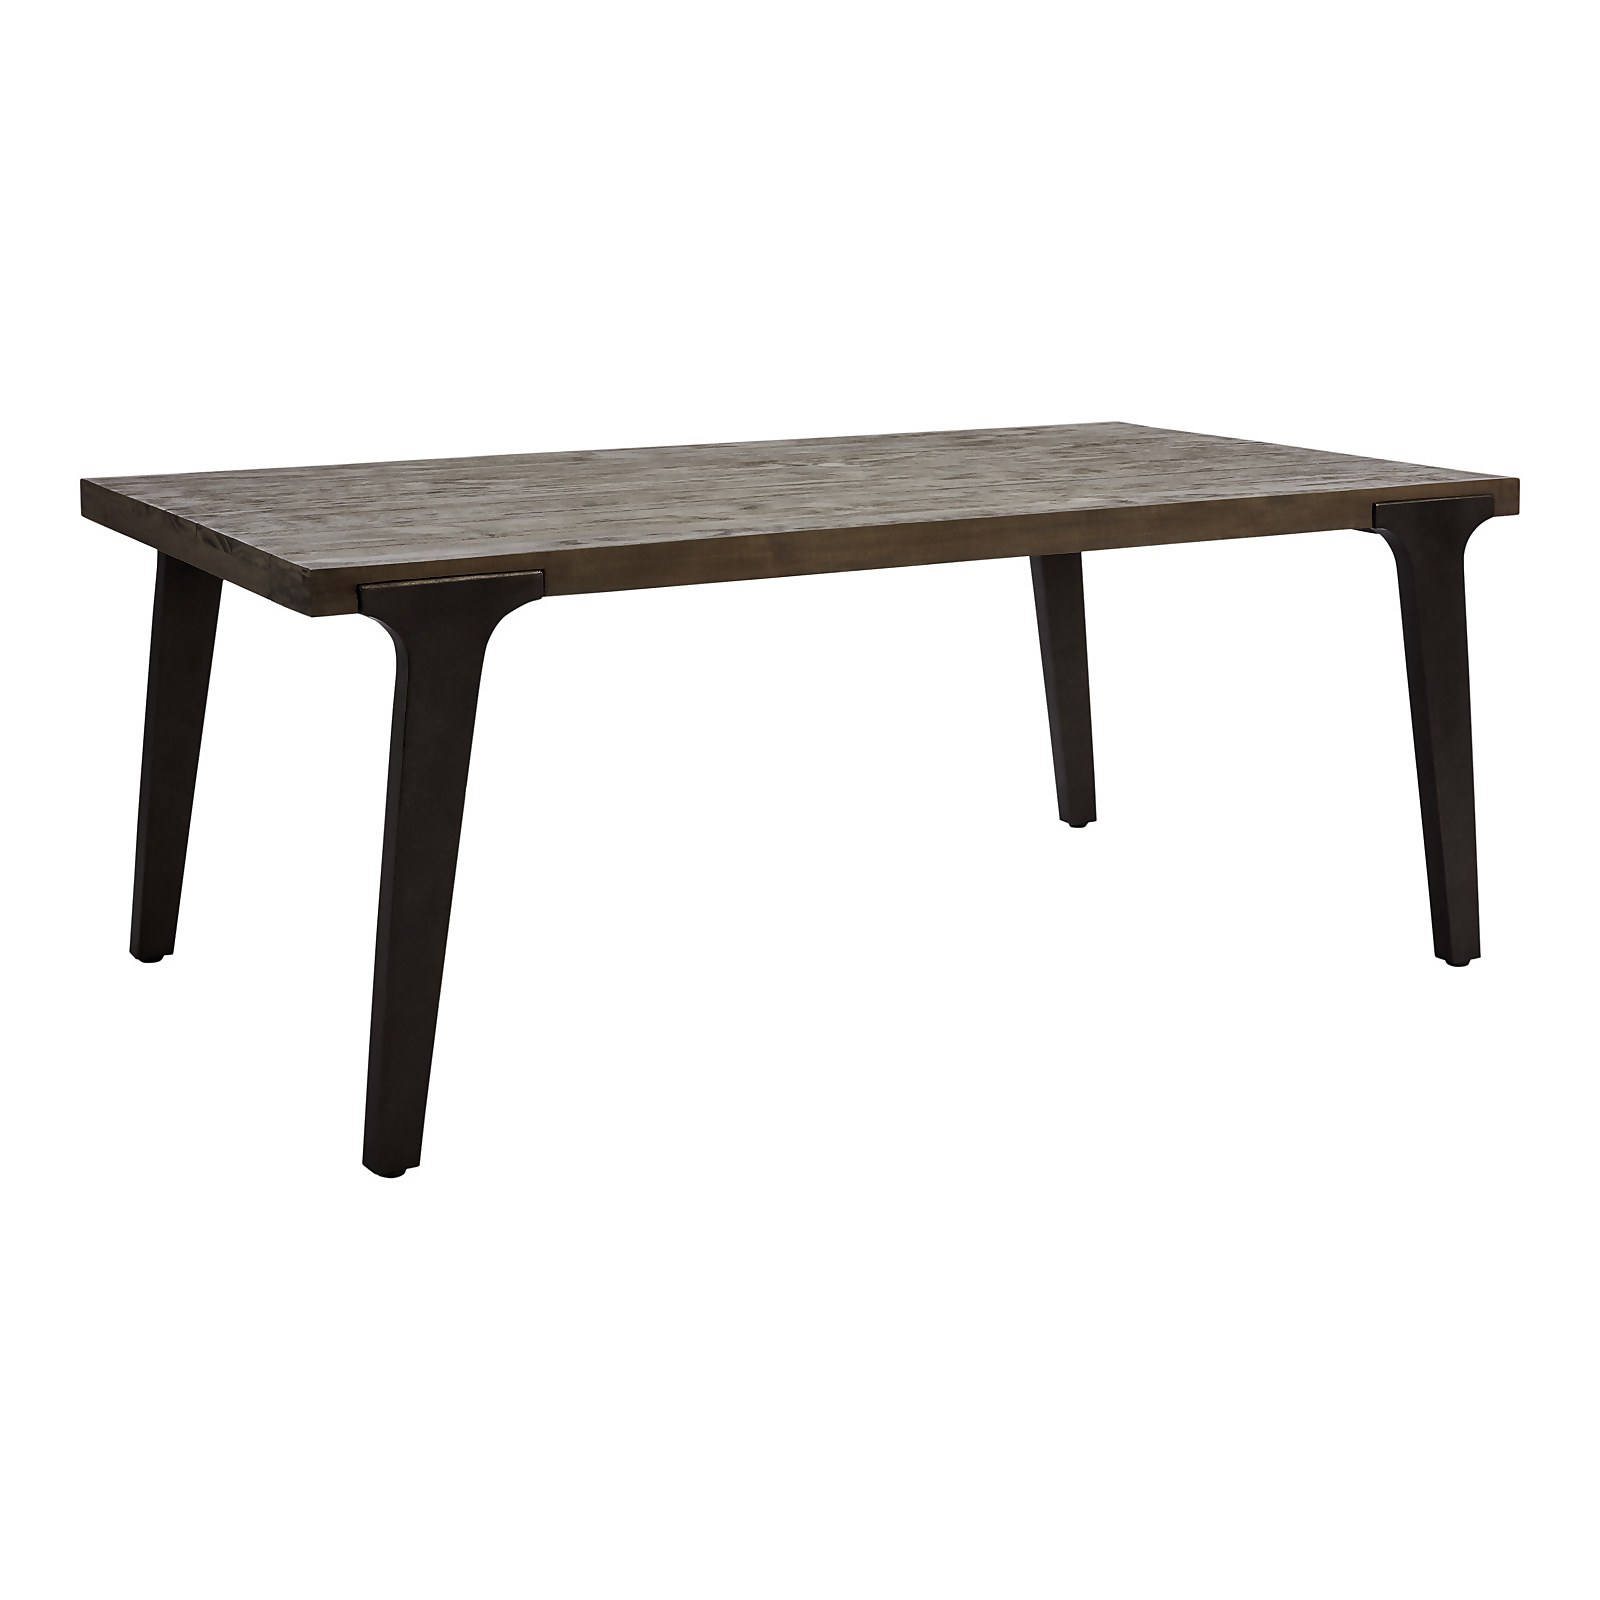 Photo of Country Living Rene Reclaimed Pine Coffee Table